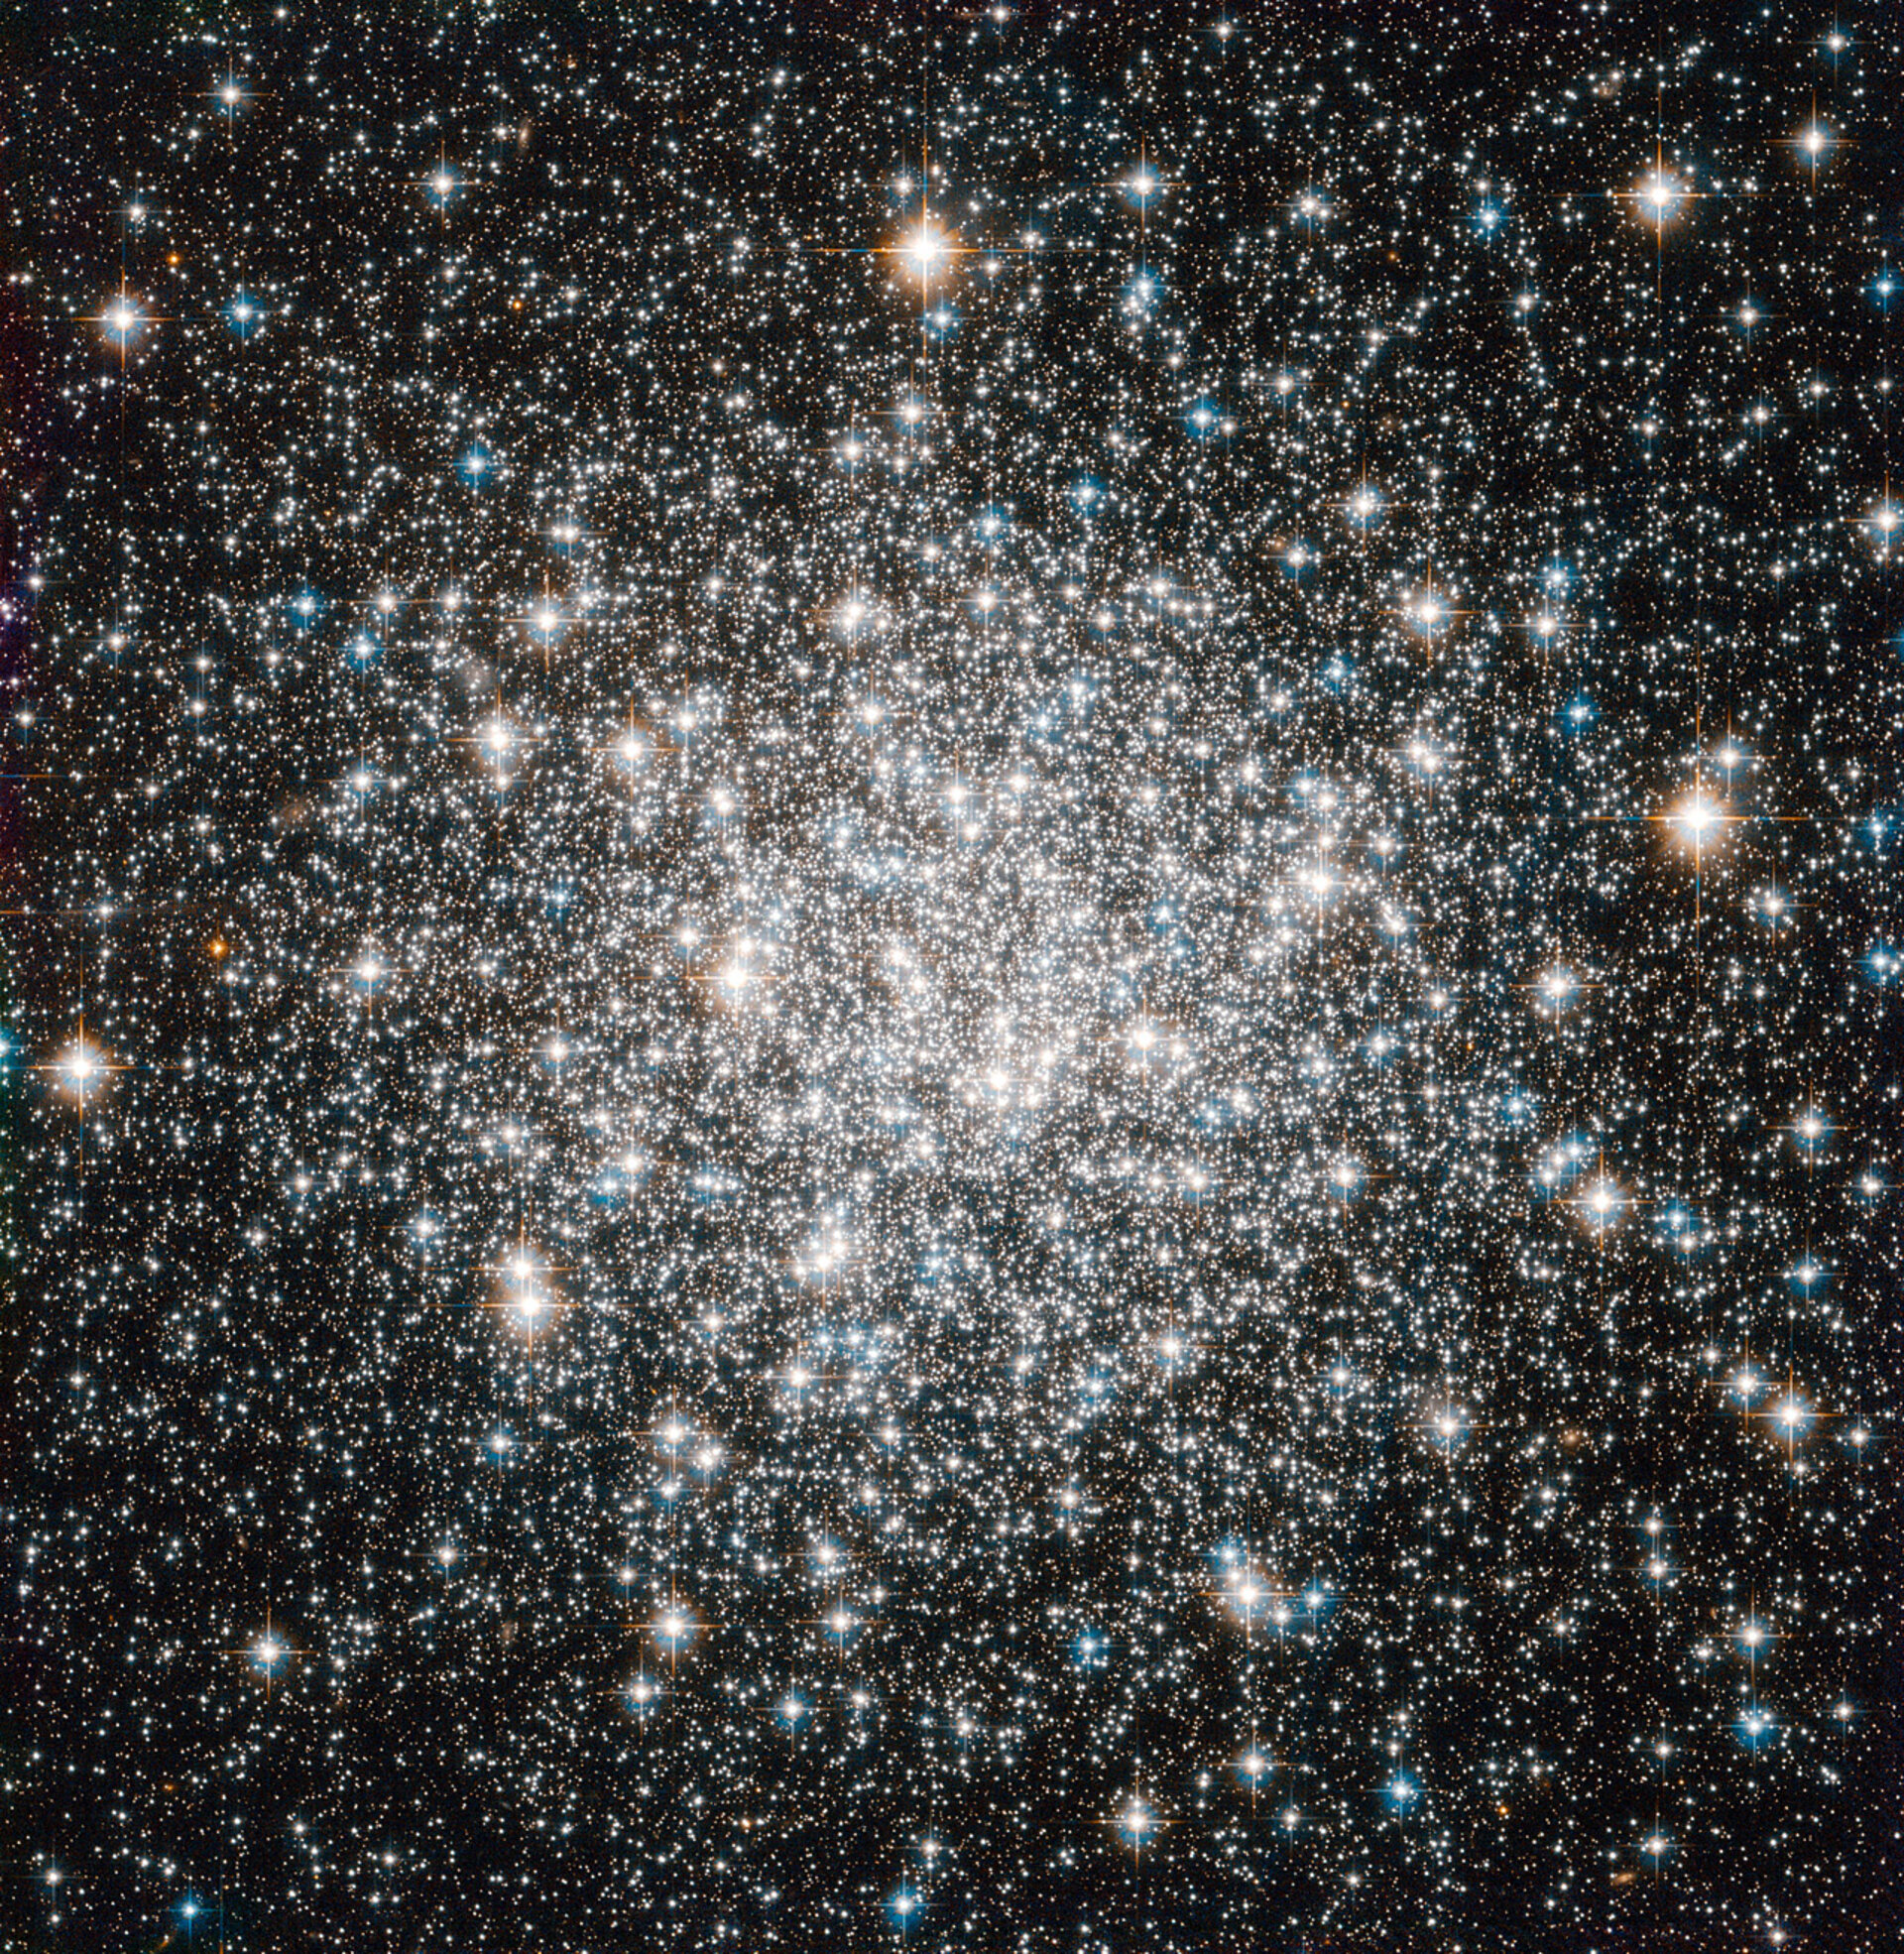 Messier 68 captured by Hubble